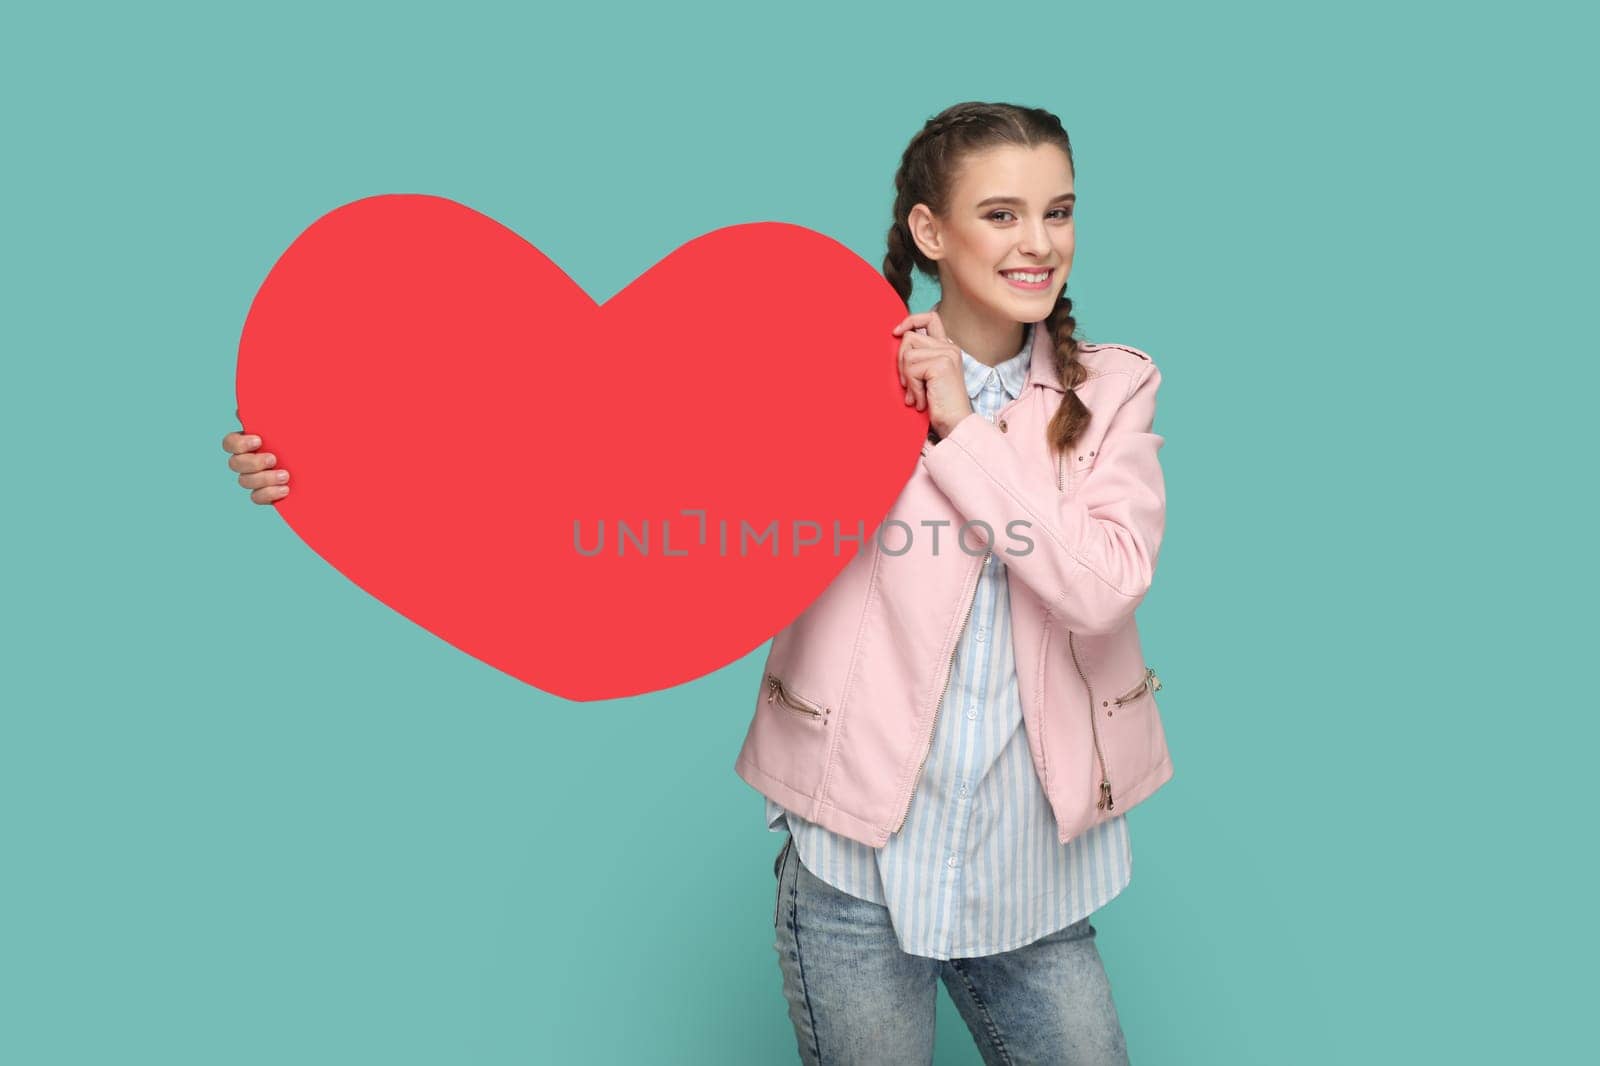 Portrait of extremely joyful cheerful teenager girl with braids wearing pink jacket, showing big red heart, smiling to camera. Indoor studio shot isolated on green background.